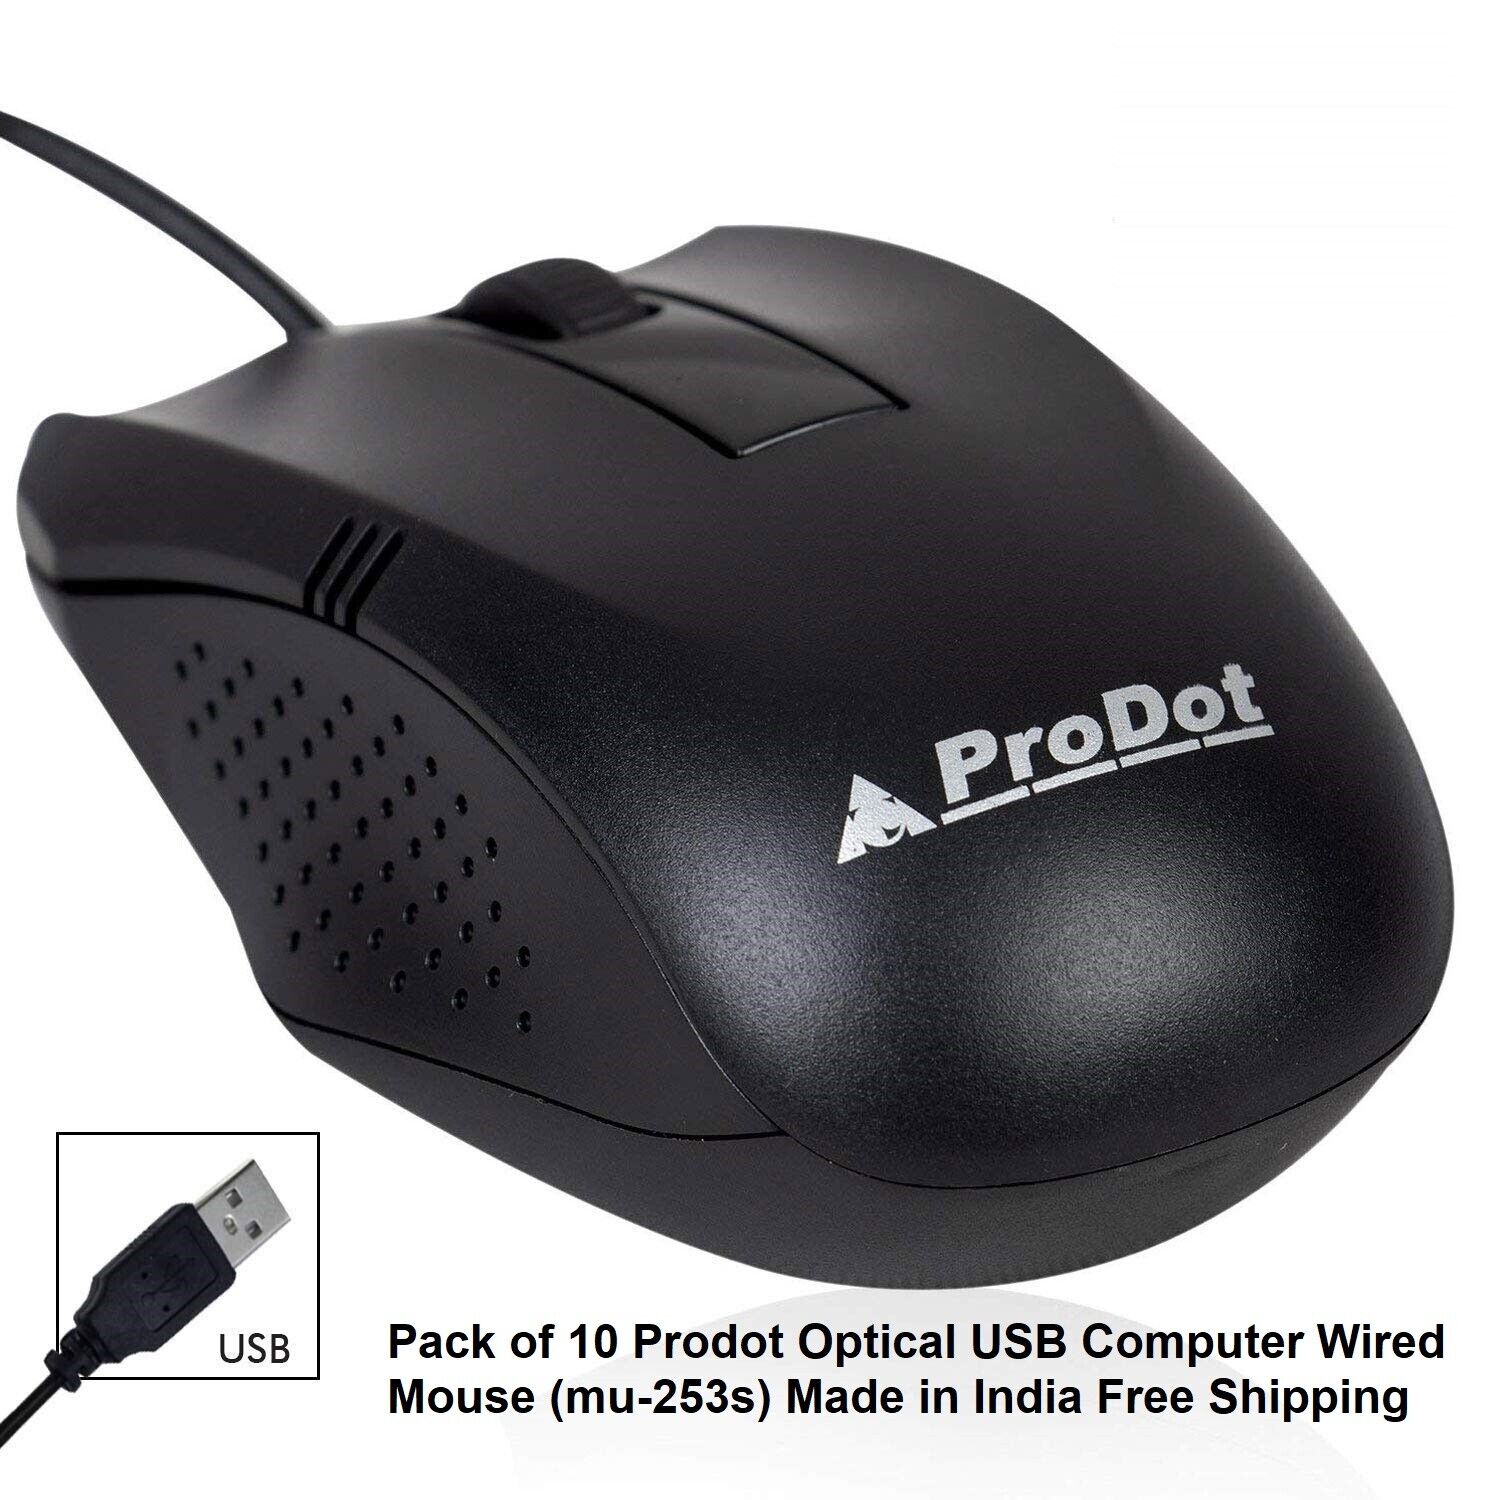 Pack of 10 Prodot Optical USB Computer Wired Mouse (mu-253s) Made in India